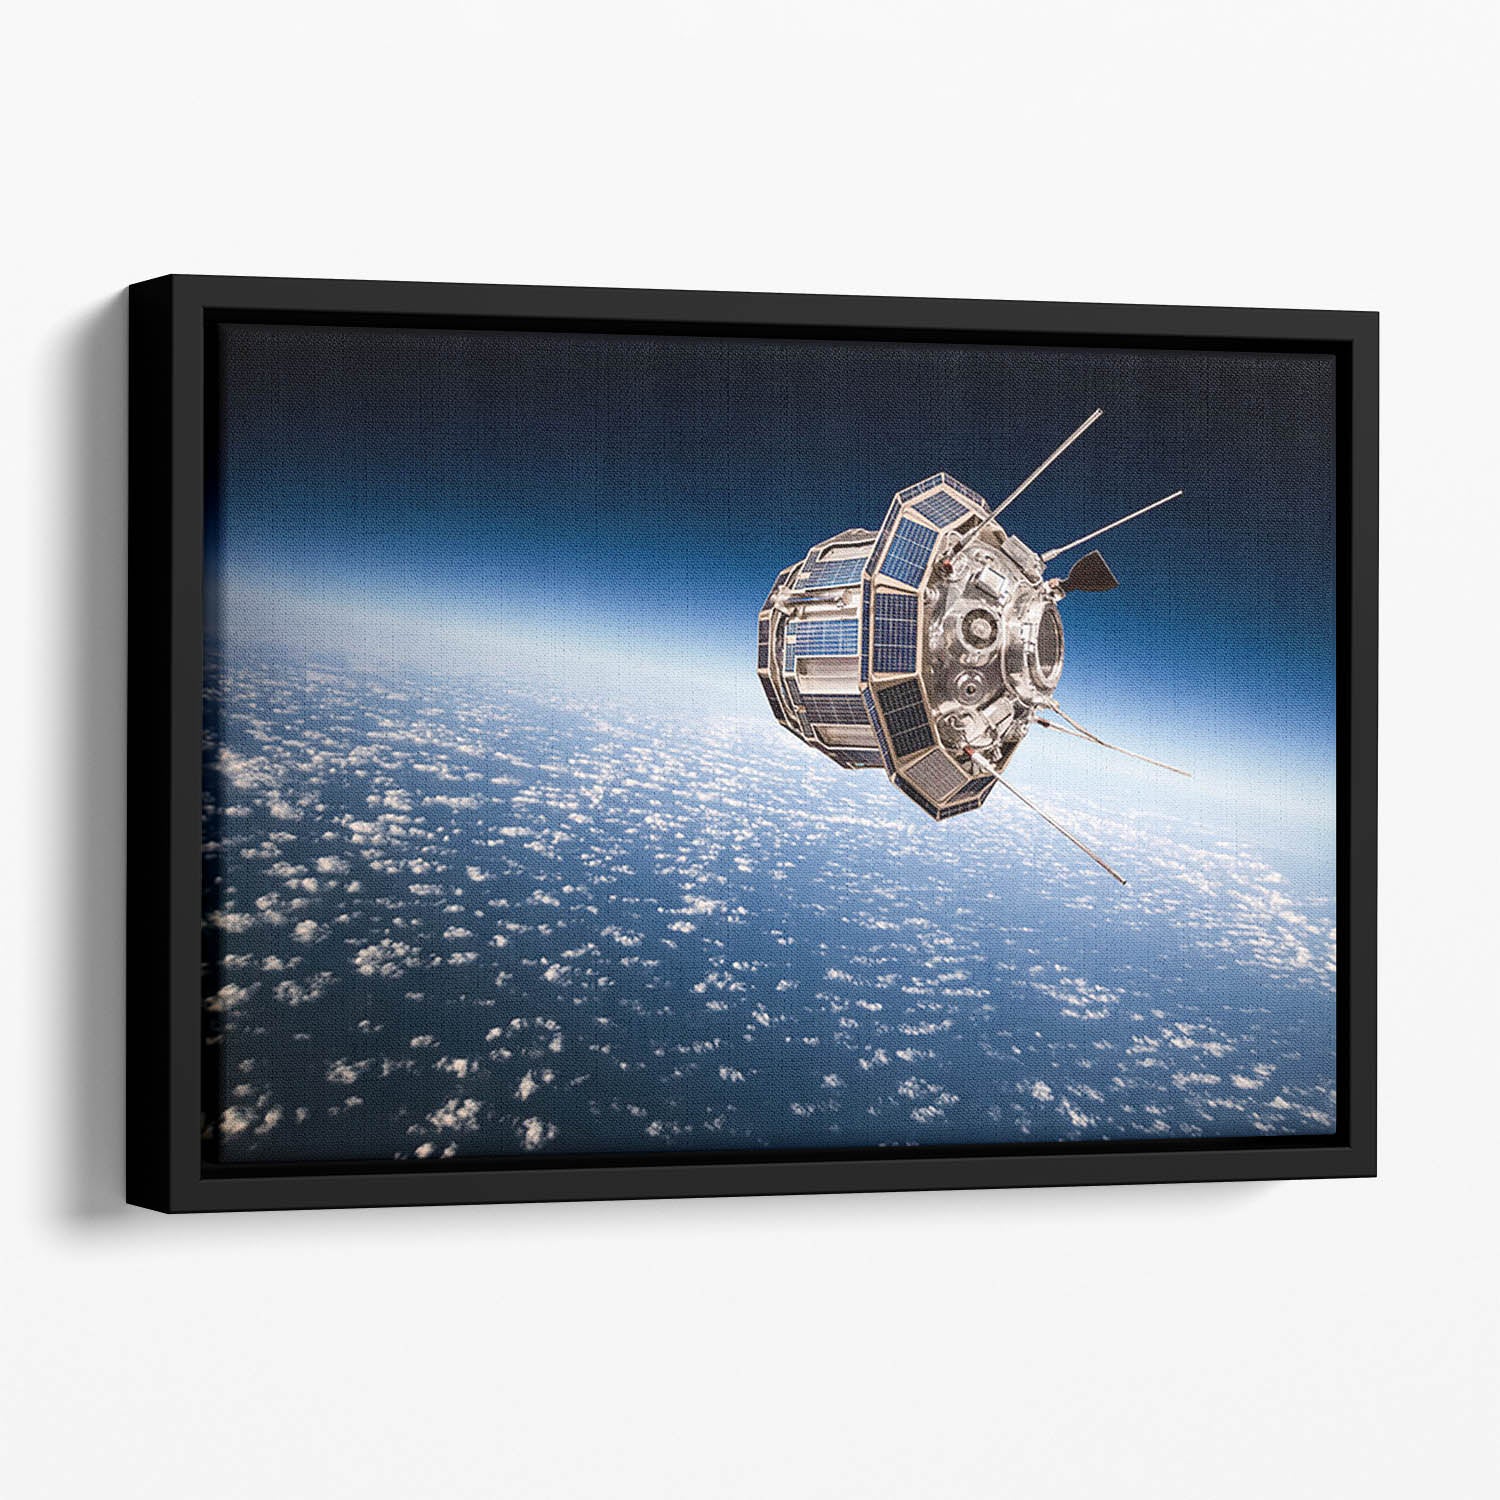 Space satellite orbiting the earth Floating Framed Canvas